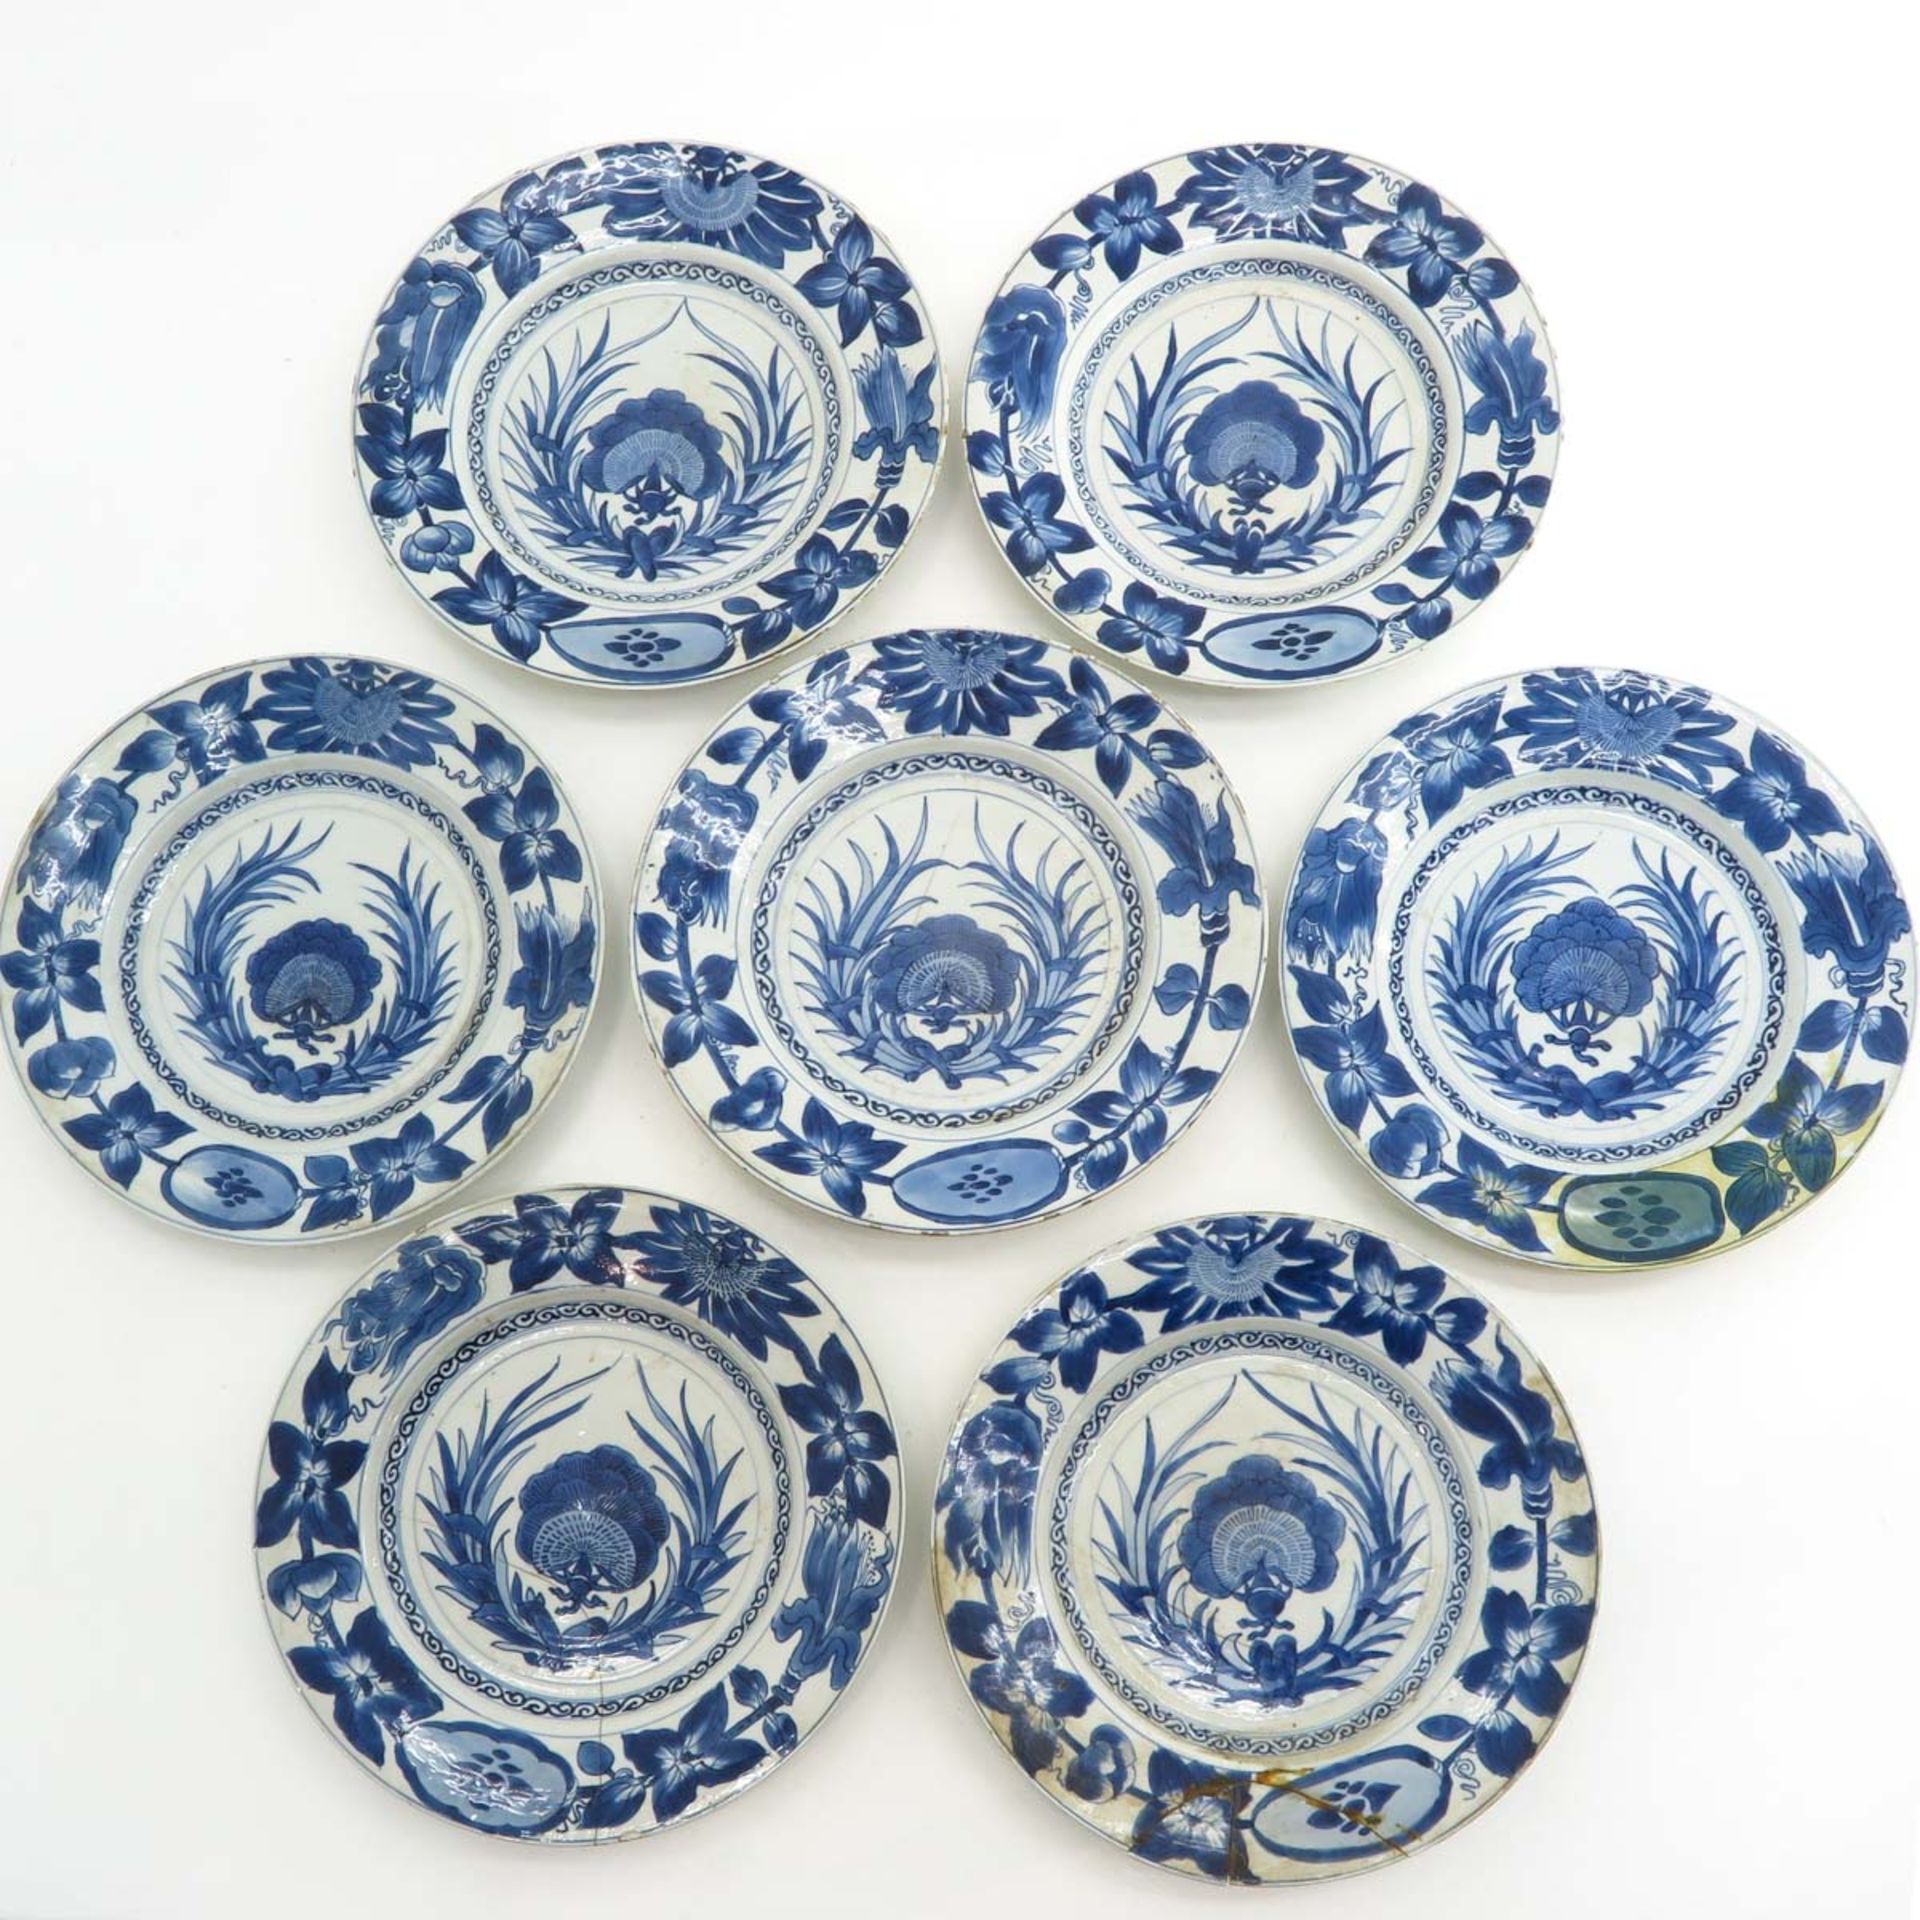 A Series of Seven Blue and White Plates